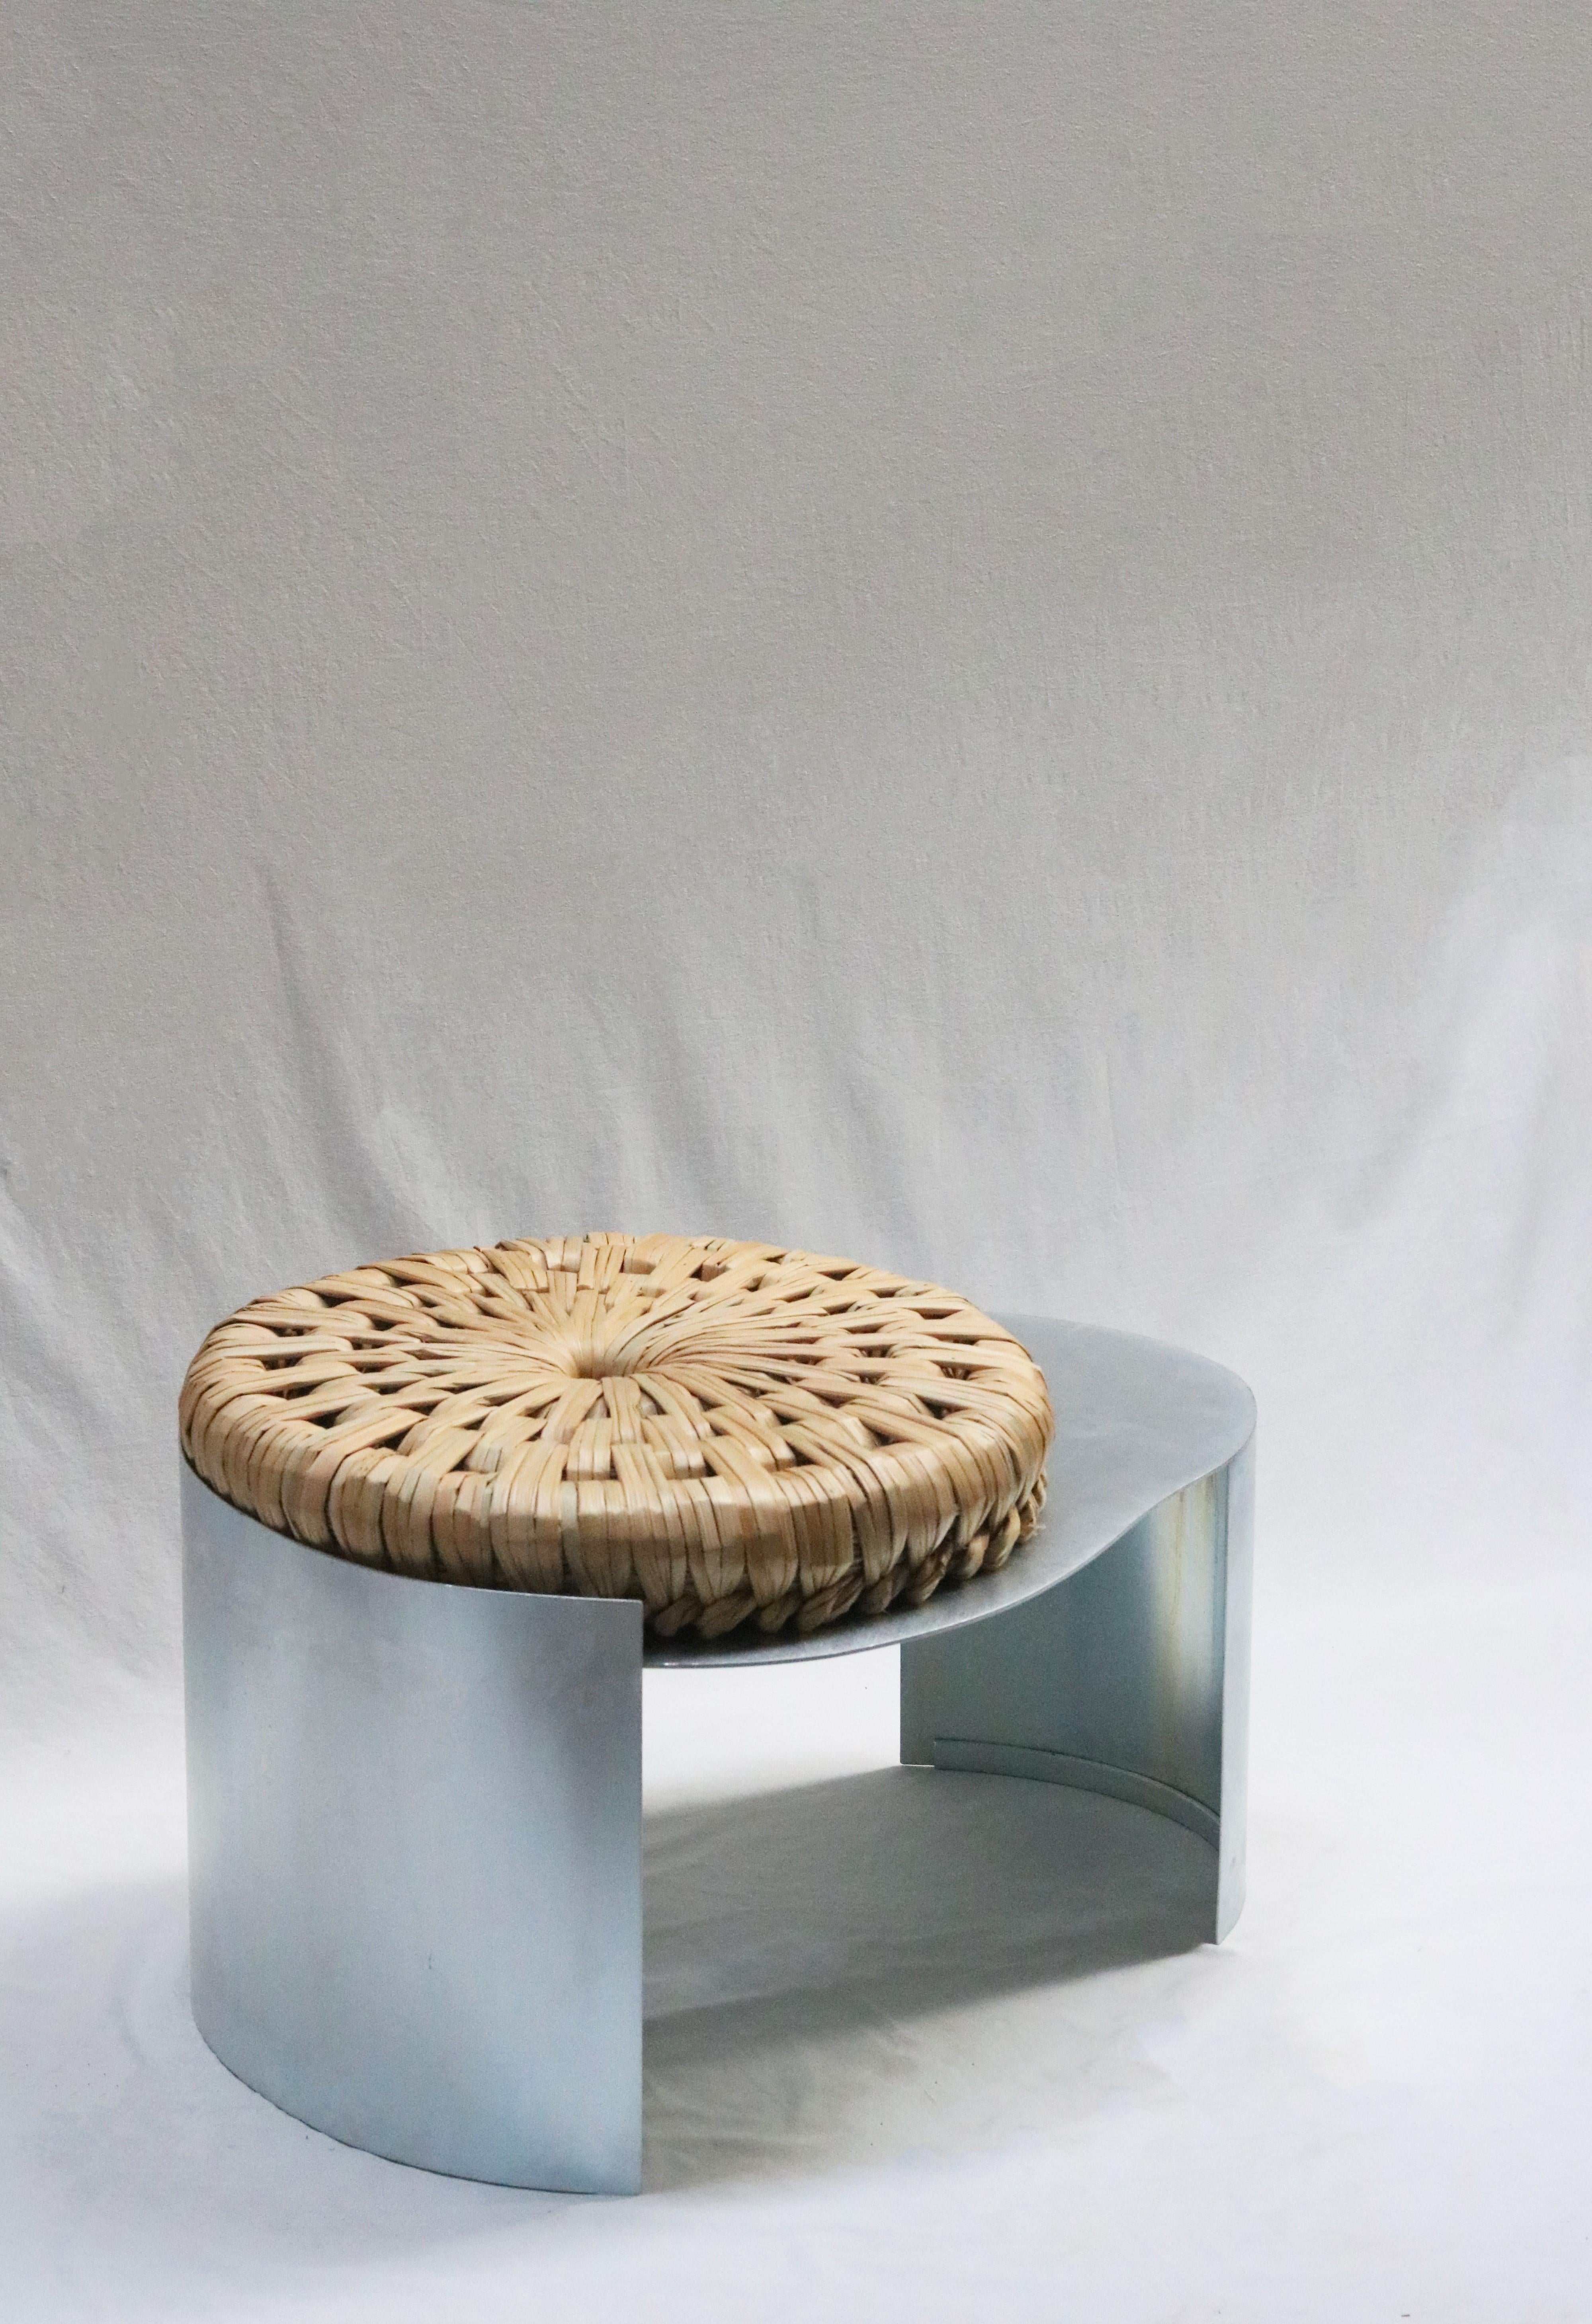 Assento Stool by Macheia
Handmade In Portugal.
Dimensions: D 55 x W 75 x H 40 cm.
Materials: Natural dried bulrush and galvanized iron.

Inspired by Tanho, the most iconic piece of the Bunho technique, Assento is a hybrid between a sitting stool and